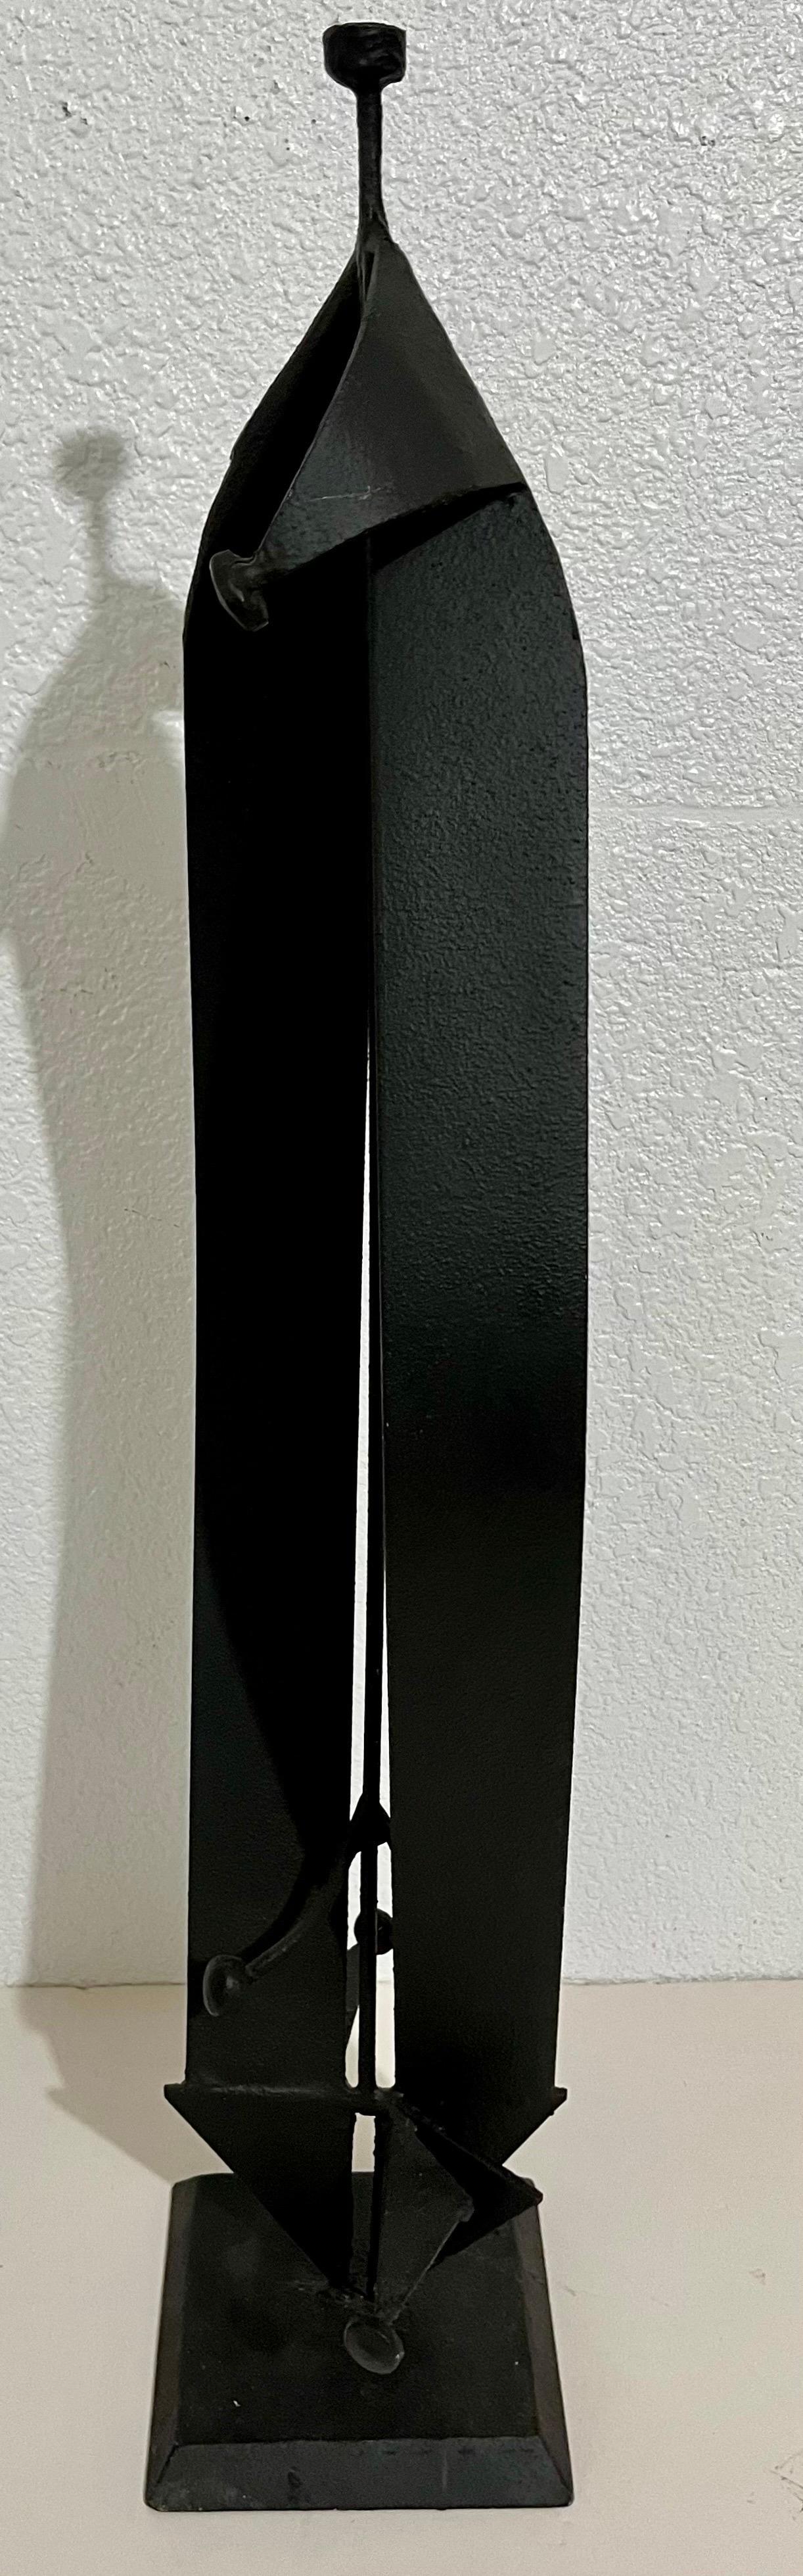 Large Mario Almaguer Cuban Art Welded Painted Steel Abstract Sculpture Modernism For Sale 5